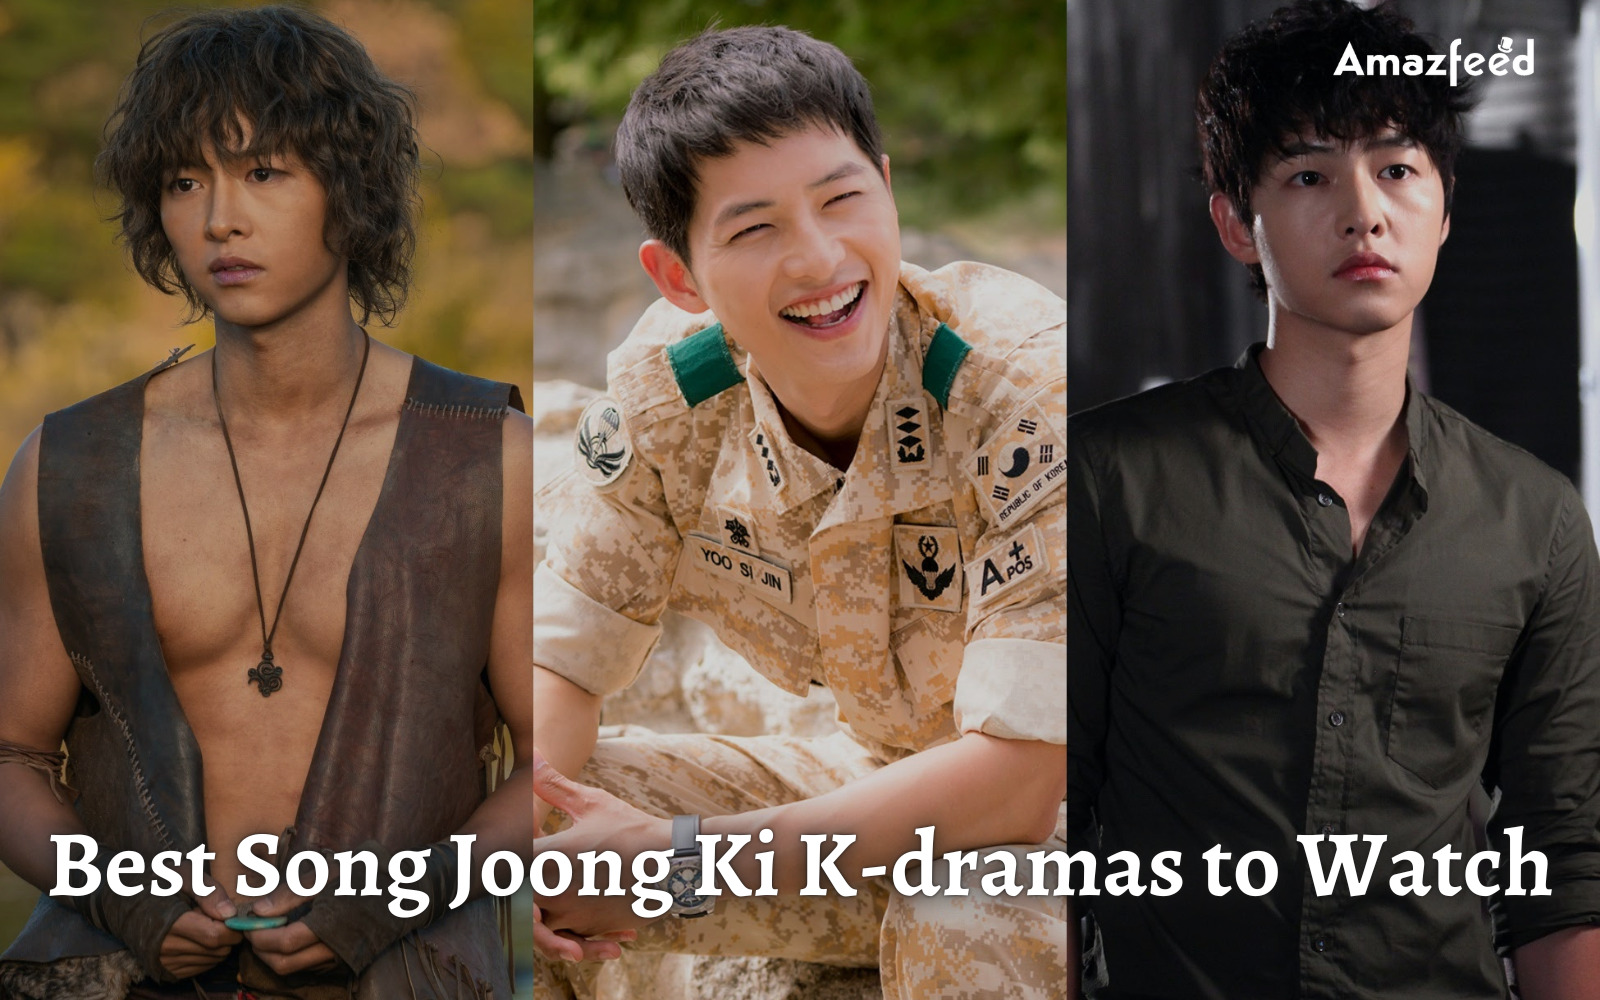 Top 15 Best Song Joong-Ki, Movies & K-Dramas To Watch In 2022 » Amazfeed